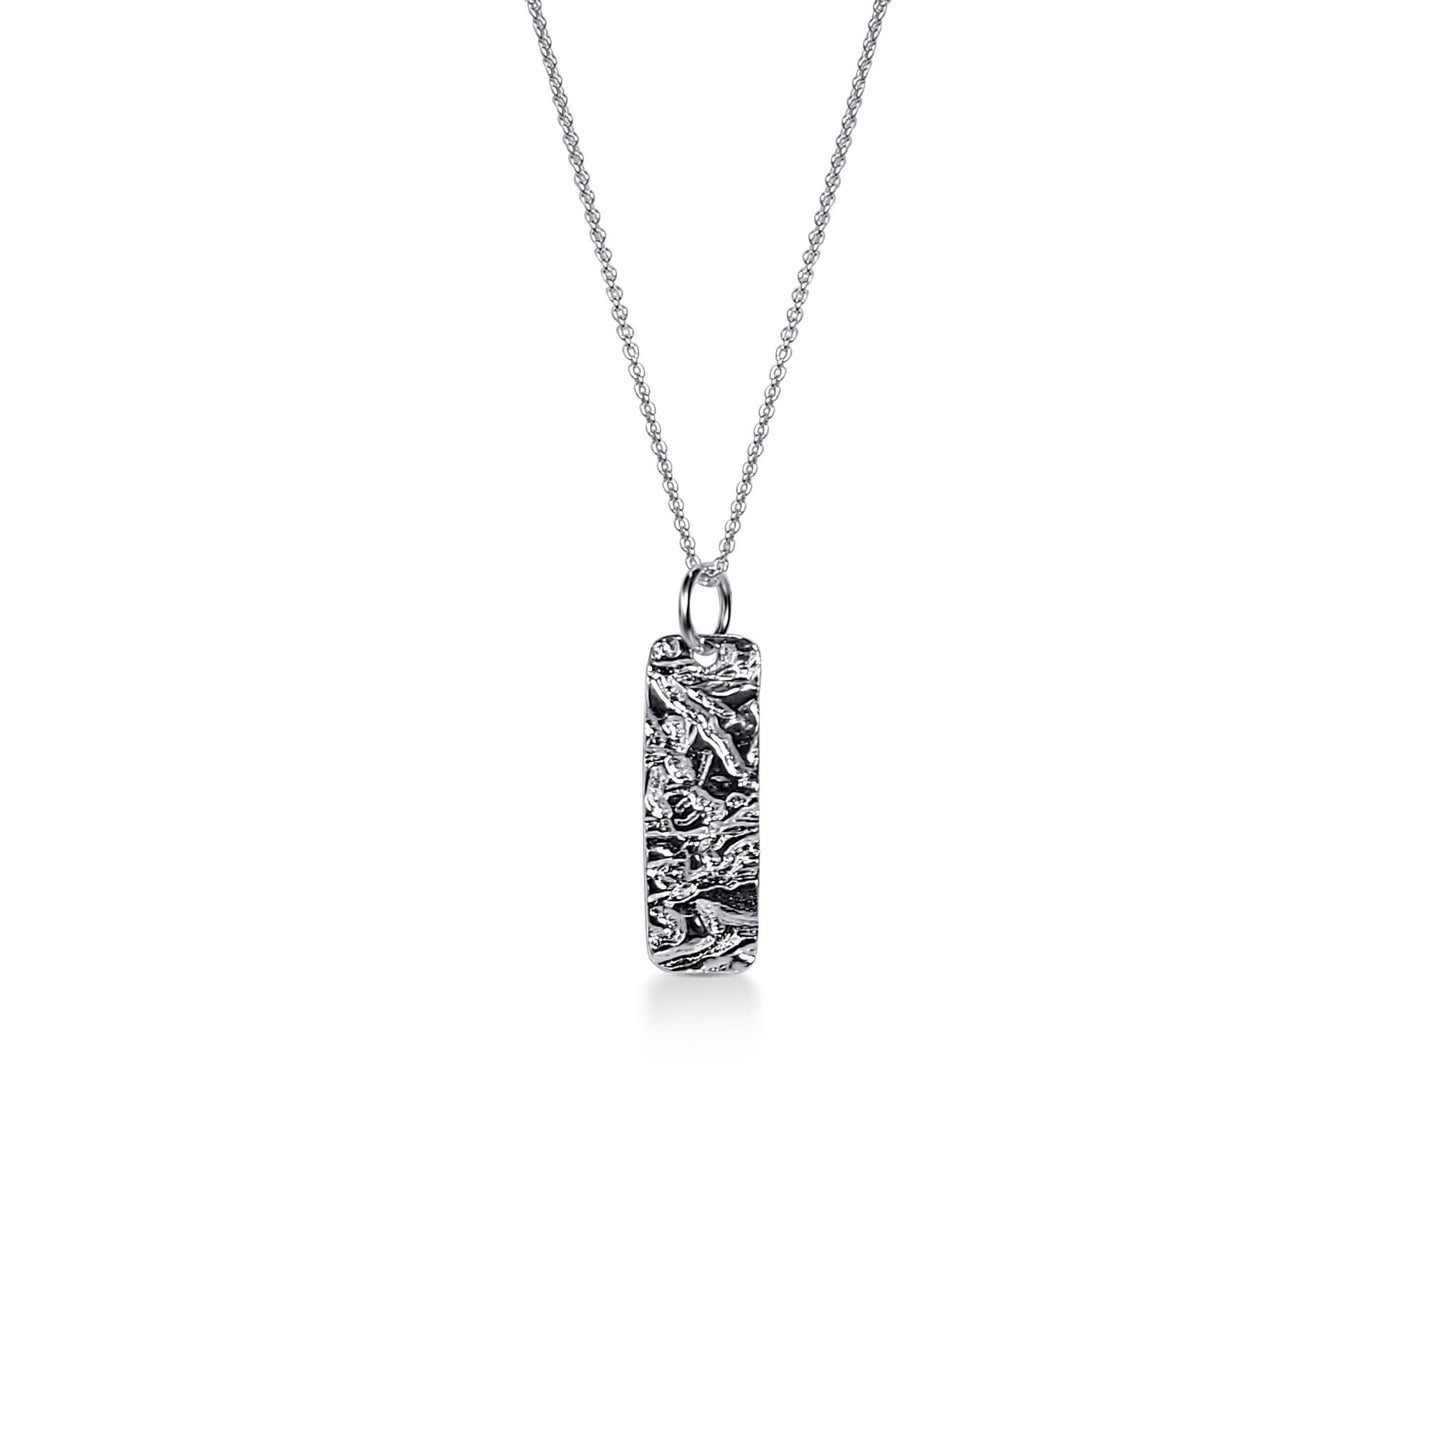 Marlowe - sterling silver pendant necklace with driftwood texture